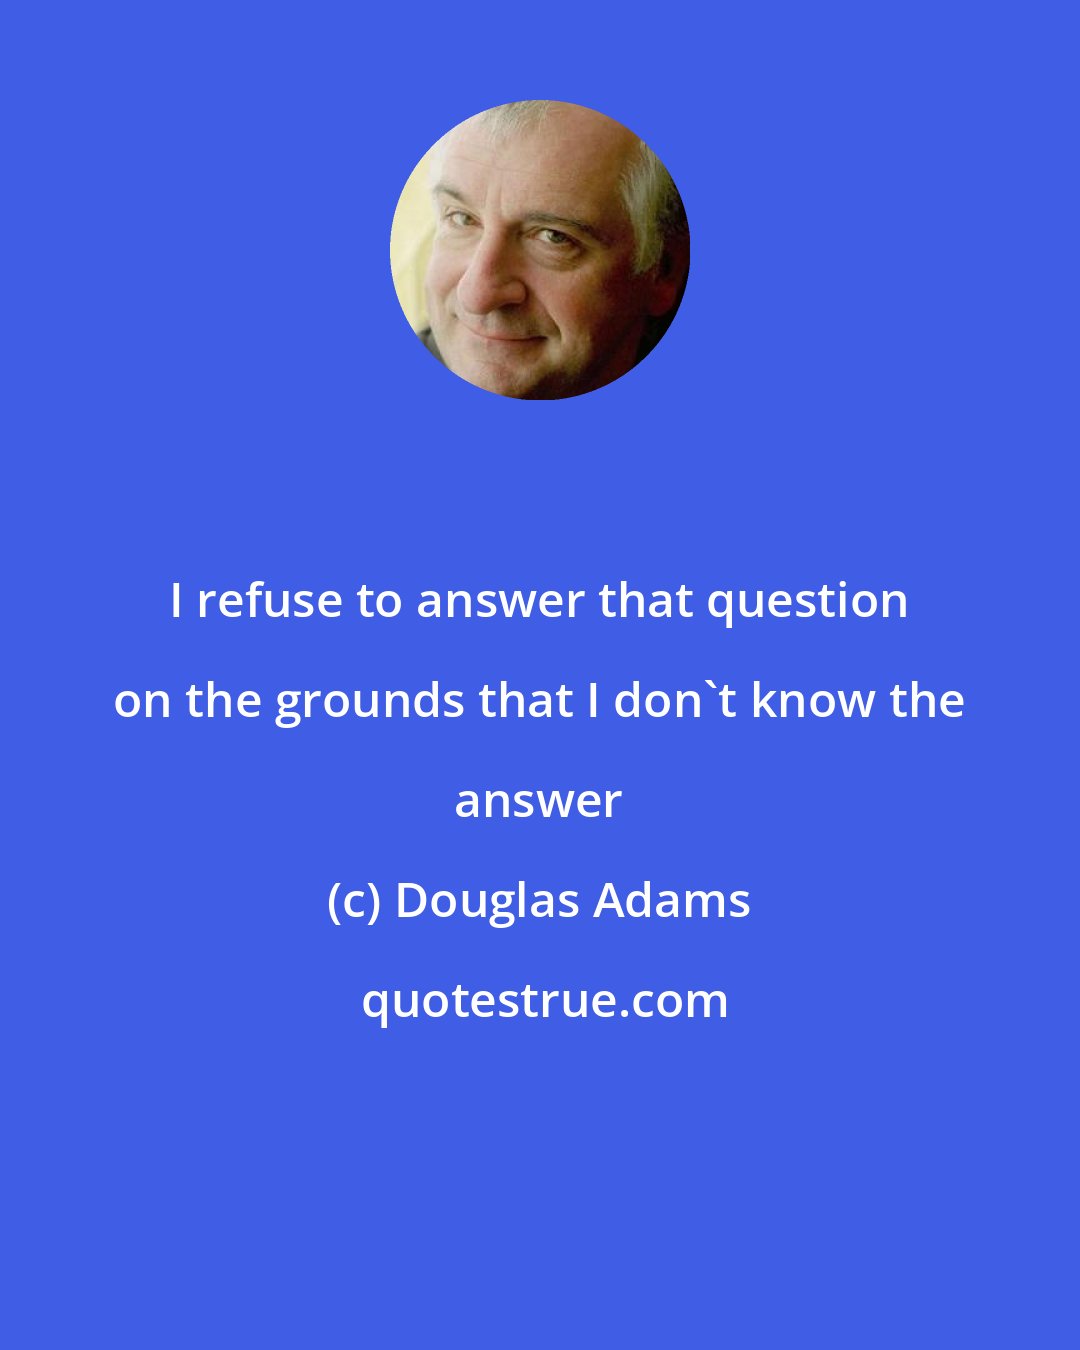 Douglas Adams: I refuse to answer that question on the grounds that I don't know the answer